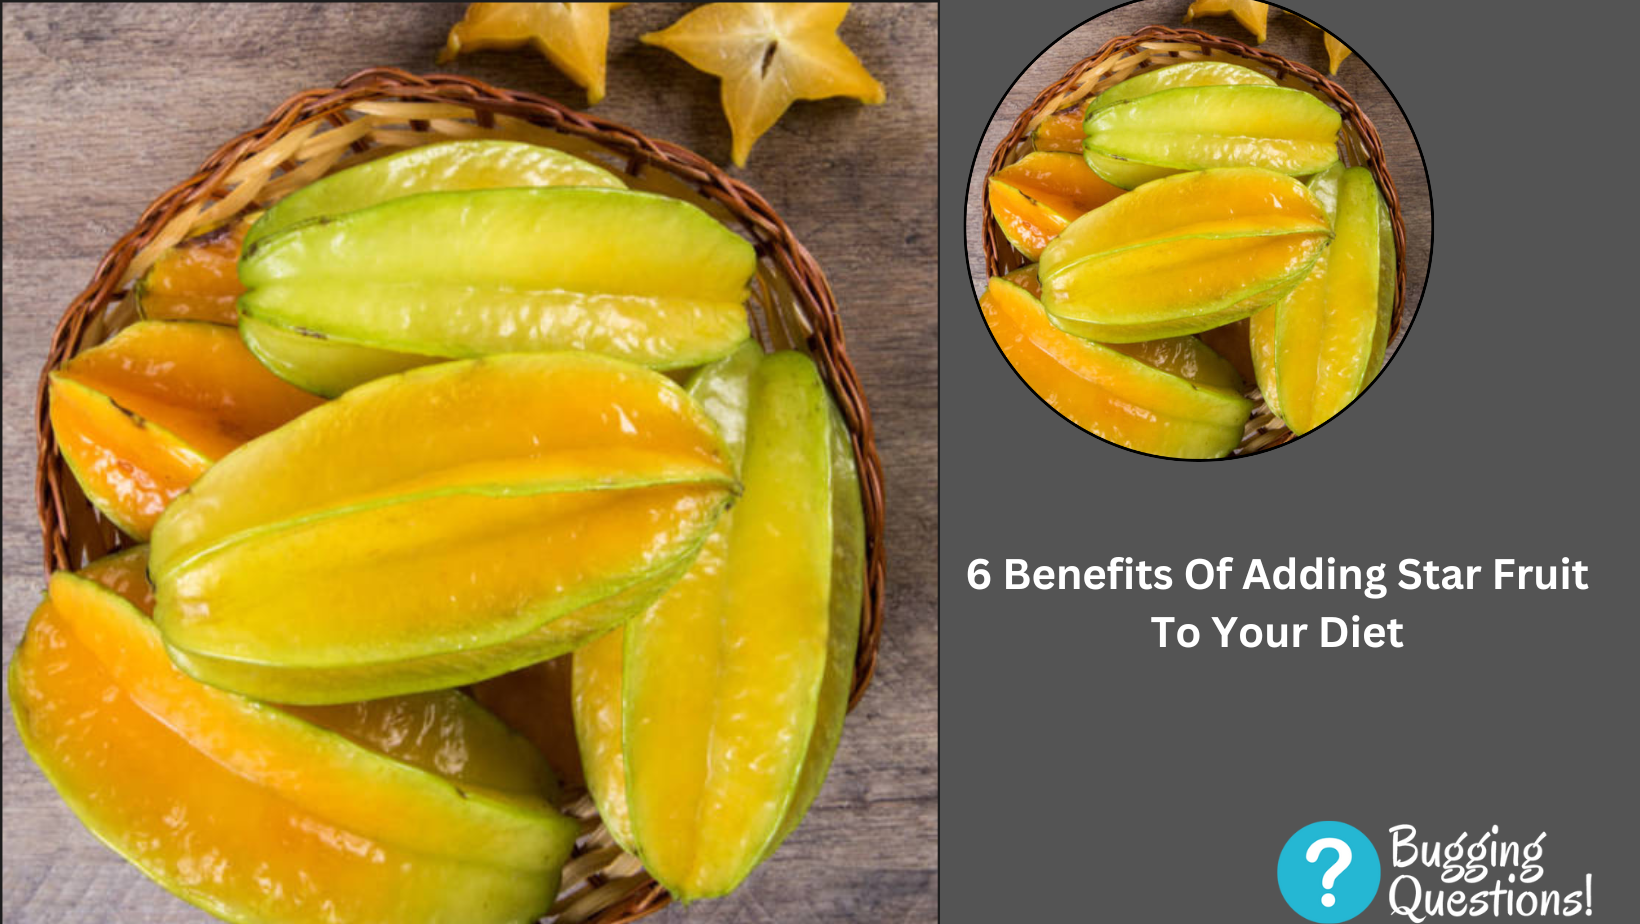 Benefits Of Adding Star Fruit To Your Diet